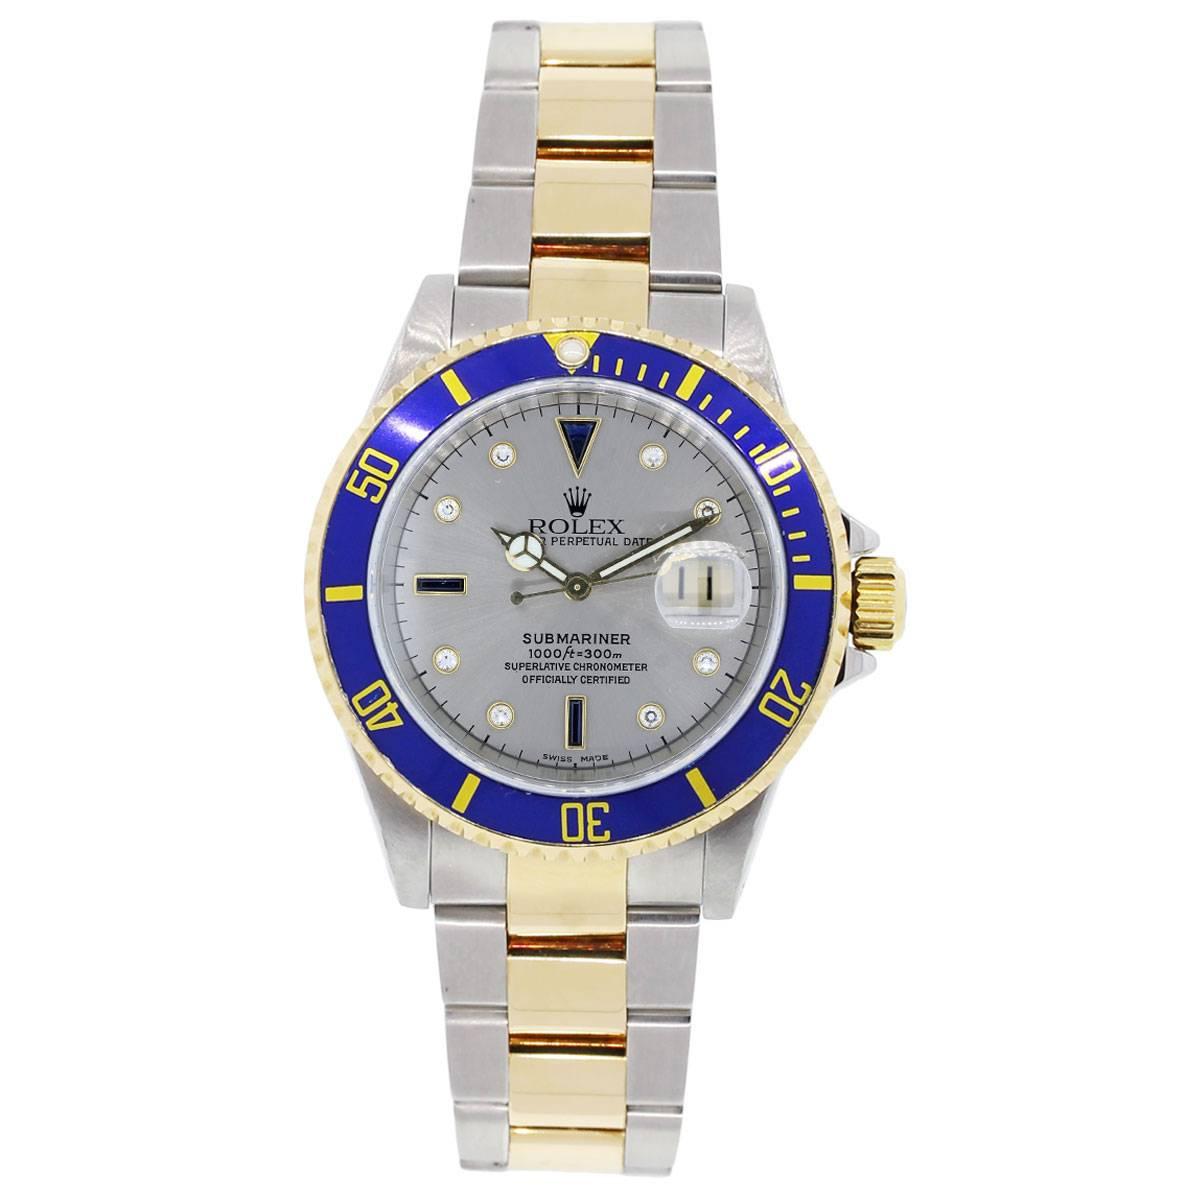 Brand: Rolex
Style: Submariner
MPN: 16613
Serial: "P" Serial
Case Material: Stainless steel
Case Diameter: 40mm
Bezel: Unidirectional 18k yellow gold bezel with blue insert
Dial: Silver diamond and blue sapphire serti dial